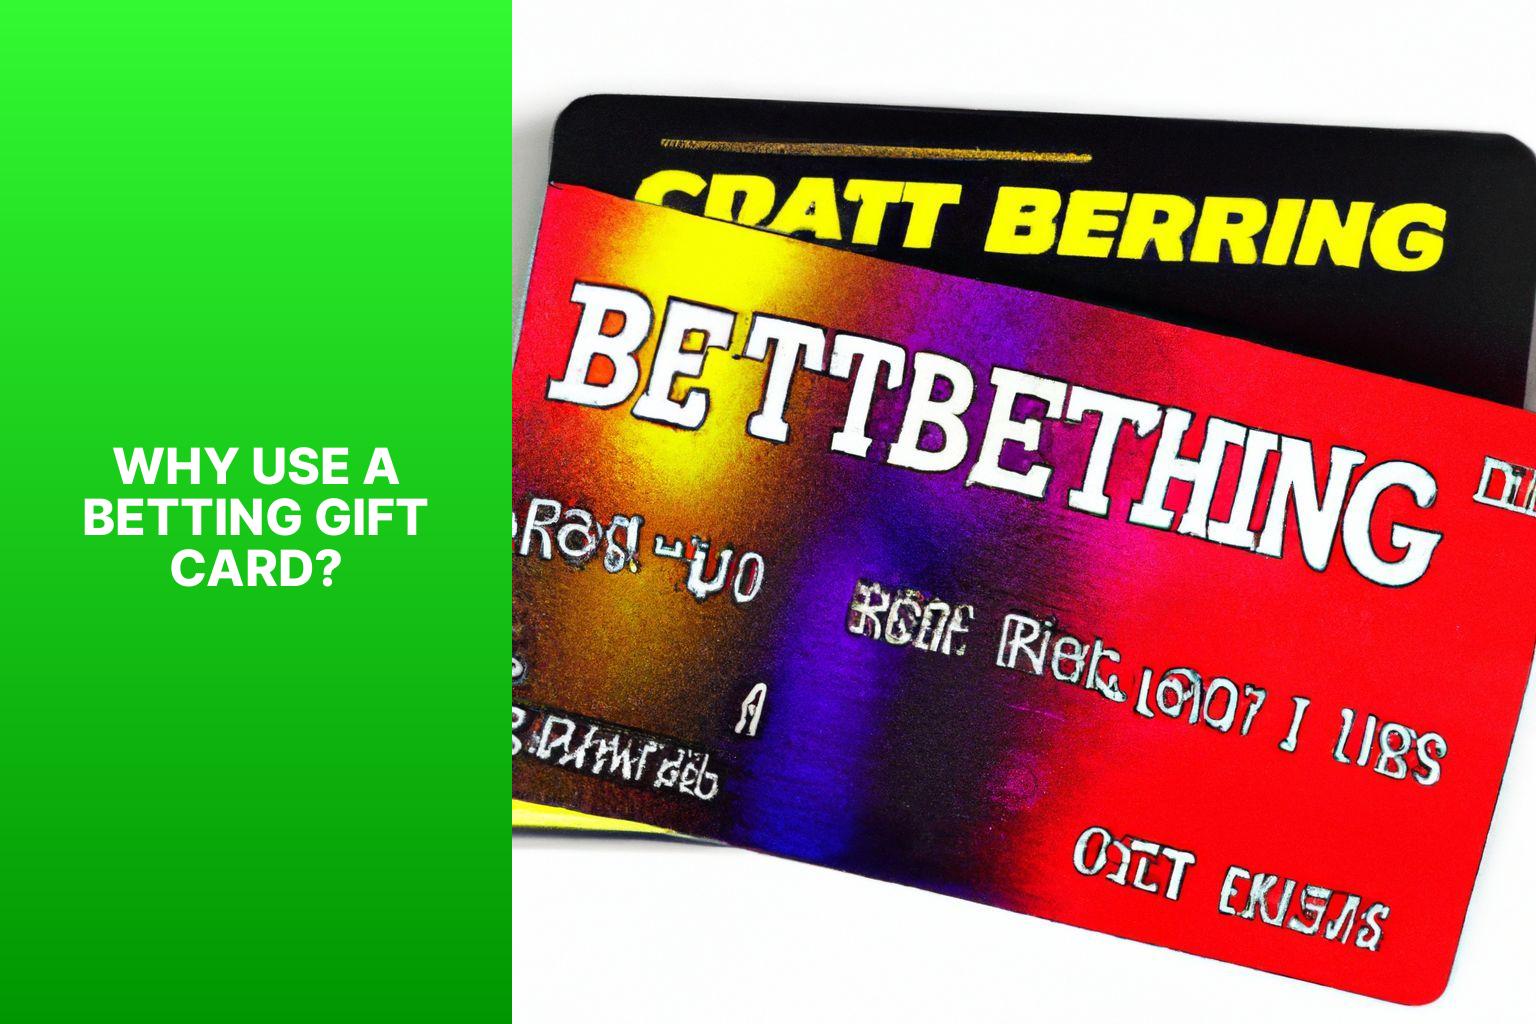 Why Use a Betting Gift Card? - Betting Gift Card: A Unique Way to Place Your Bets 